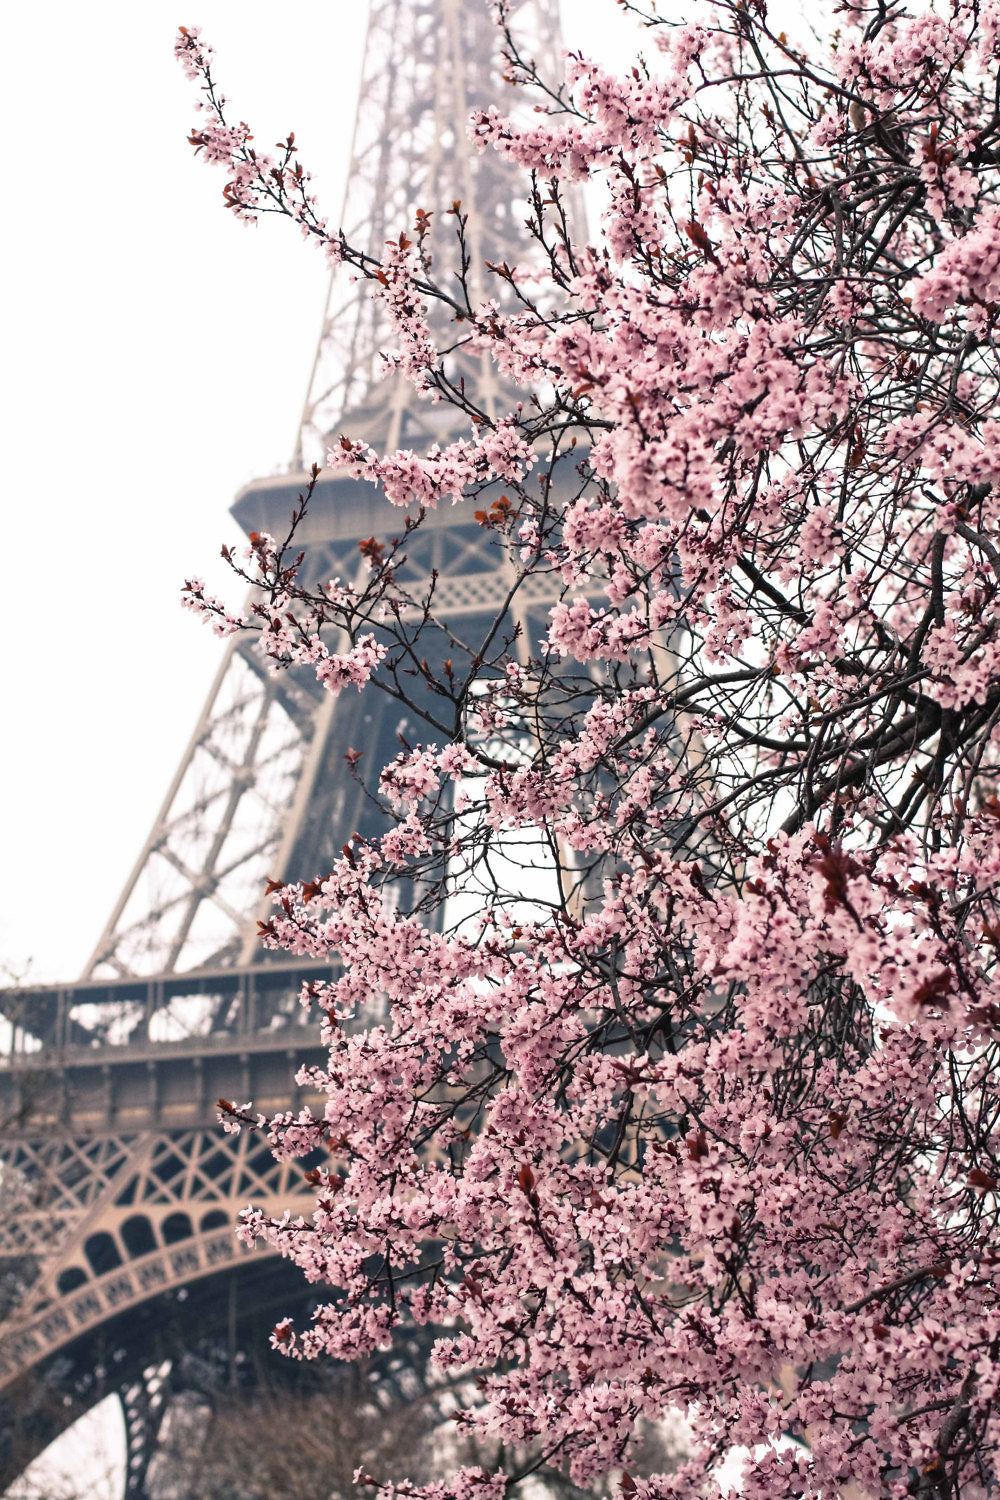 Pink Cherry Blossoms in front of the Eiffel Tower - Every Day Paris 